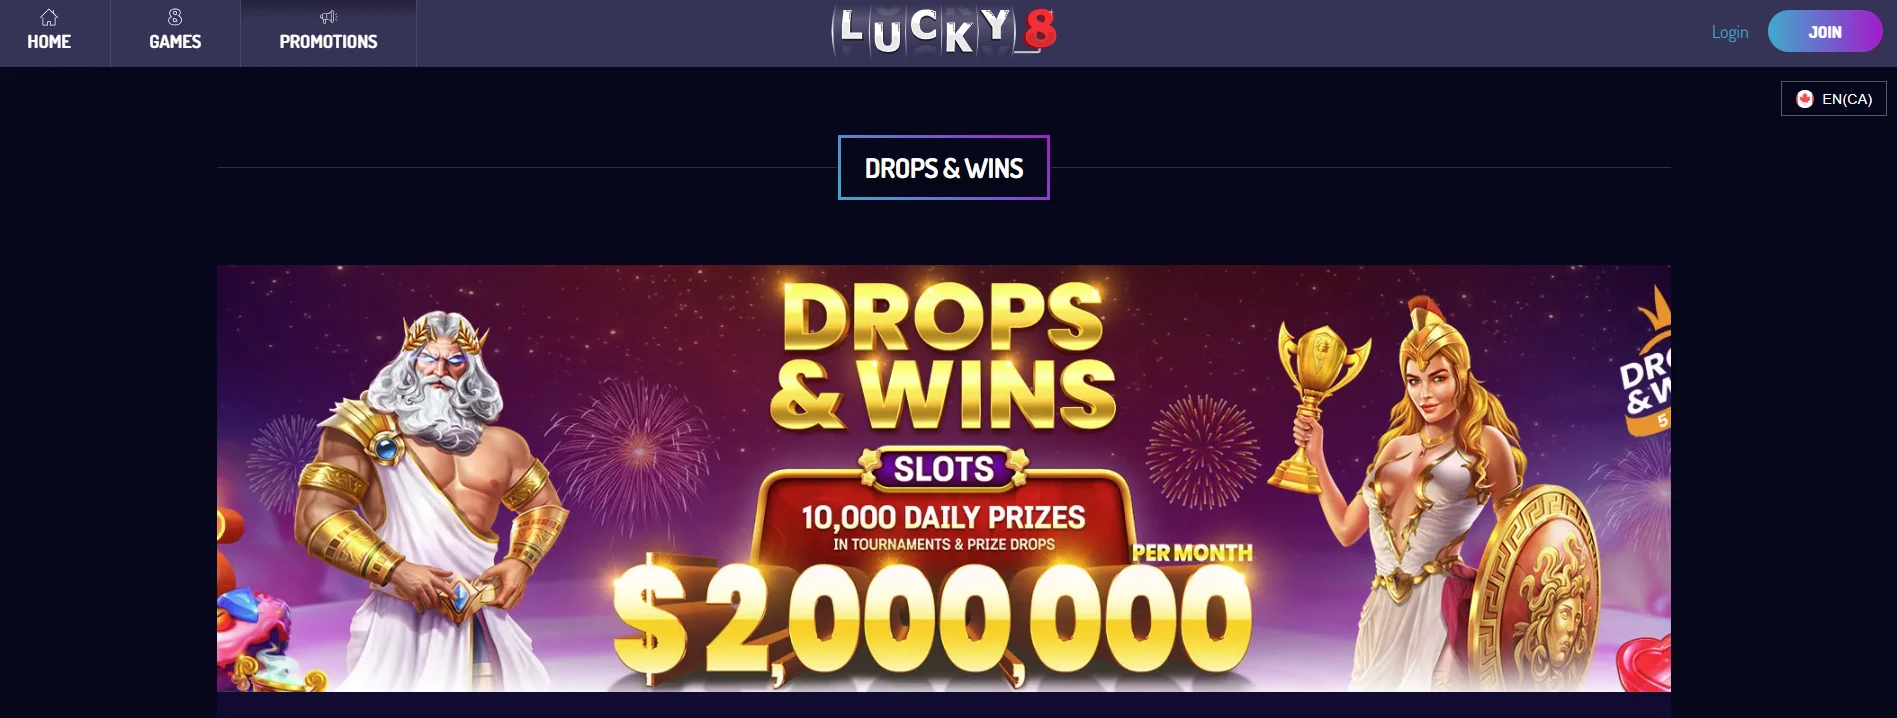 Lucky8 Drops and Wins